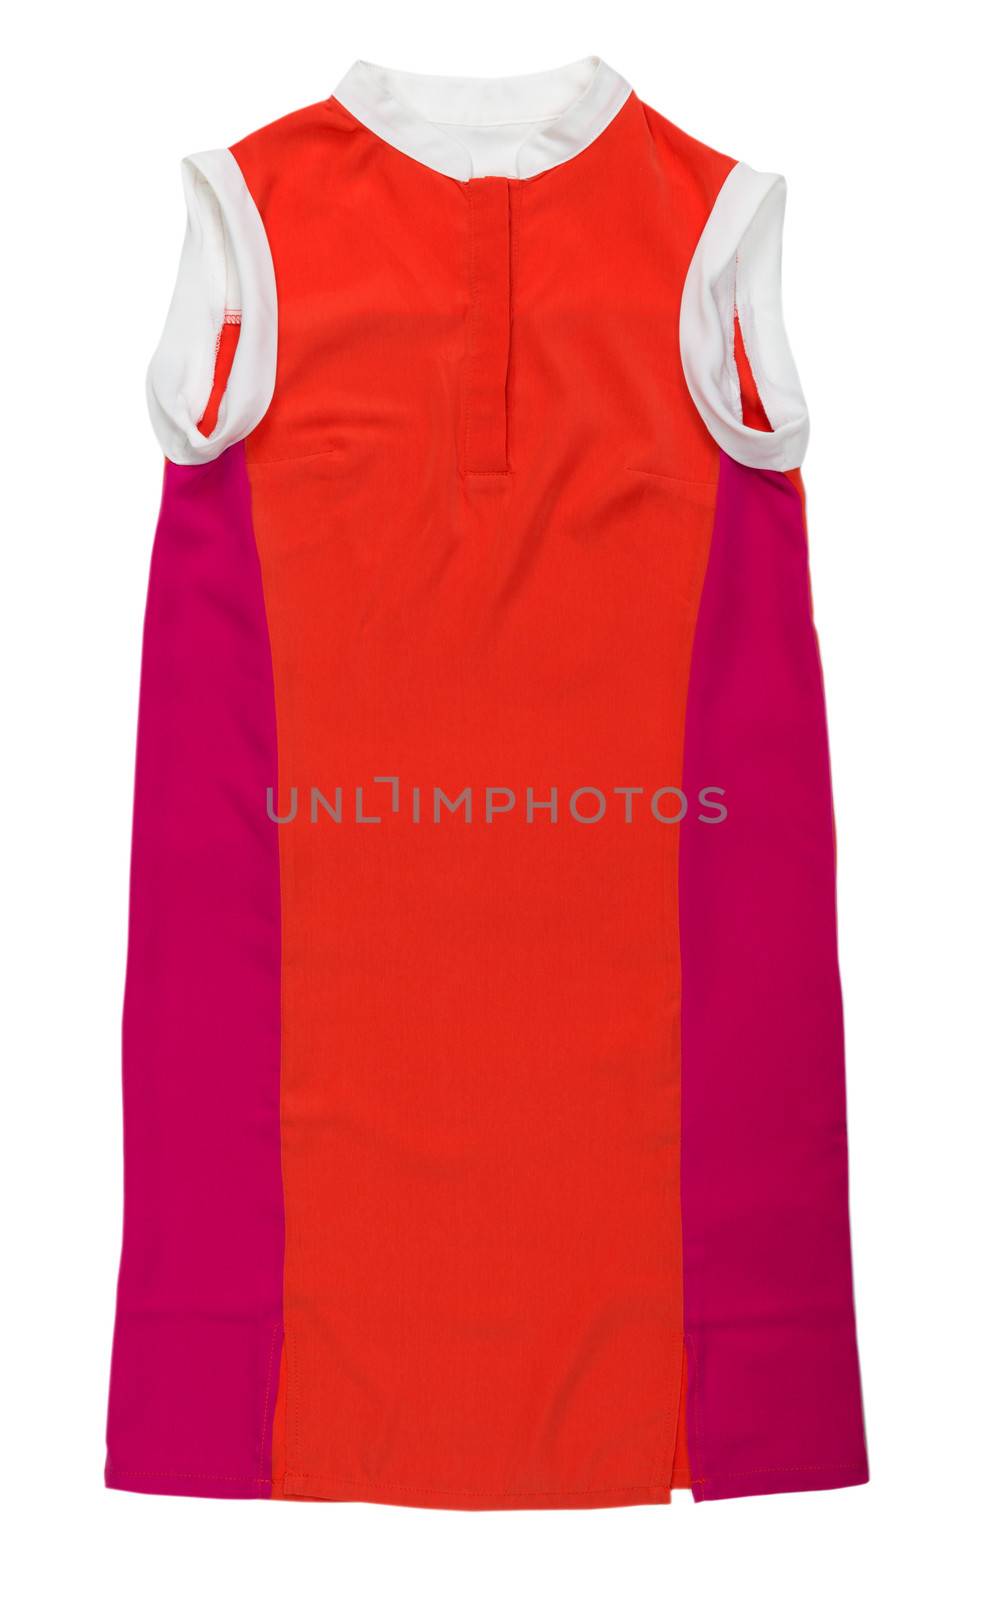 Orange with red color fashionable women's clothing. Isolate on white. See more